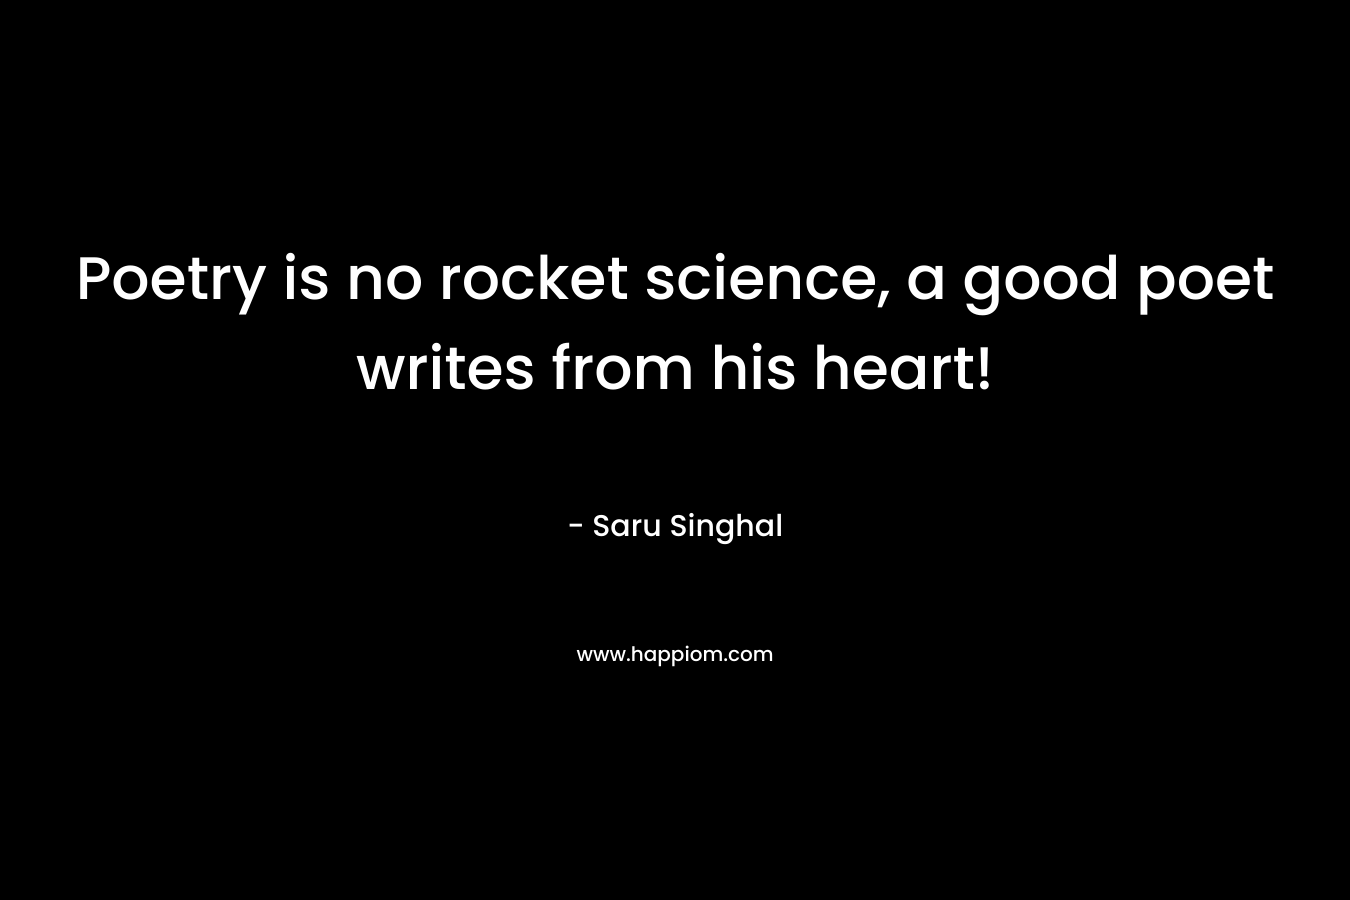 Poetry is no rocket science, a good poet writes from his heart! – Saru Singhal